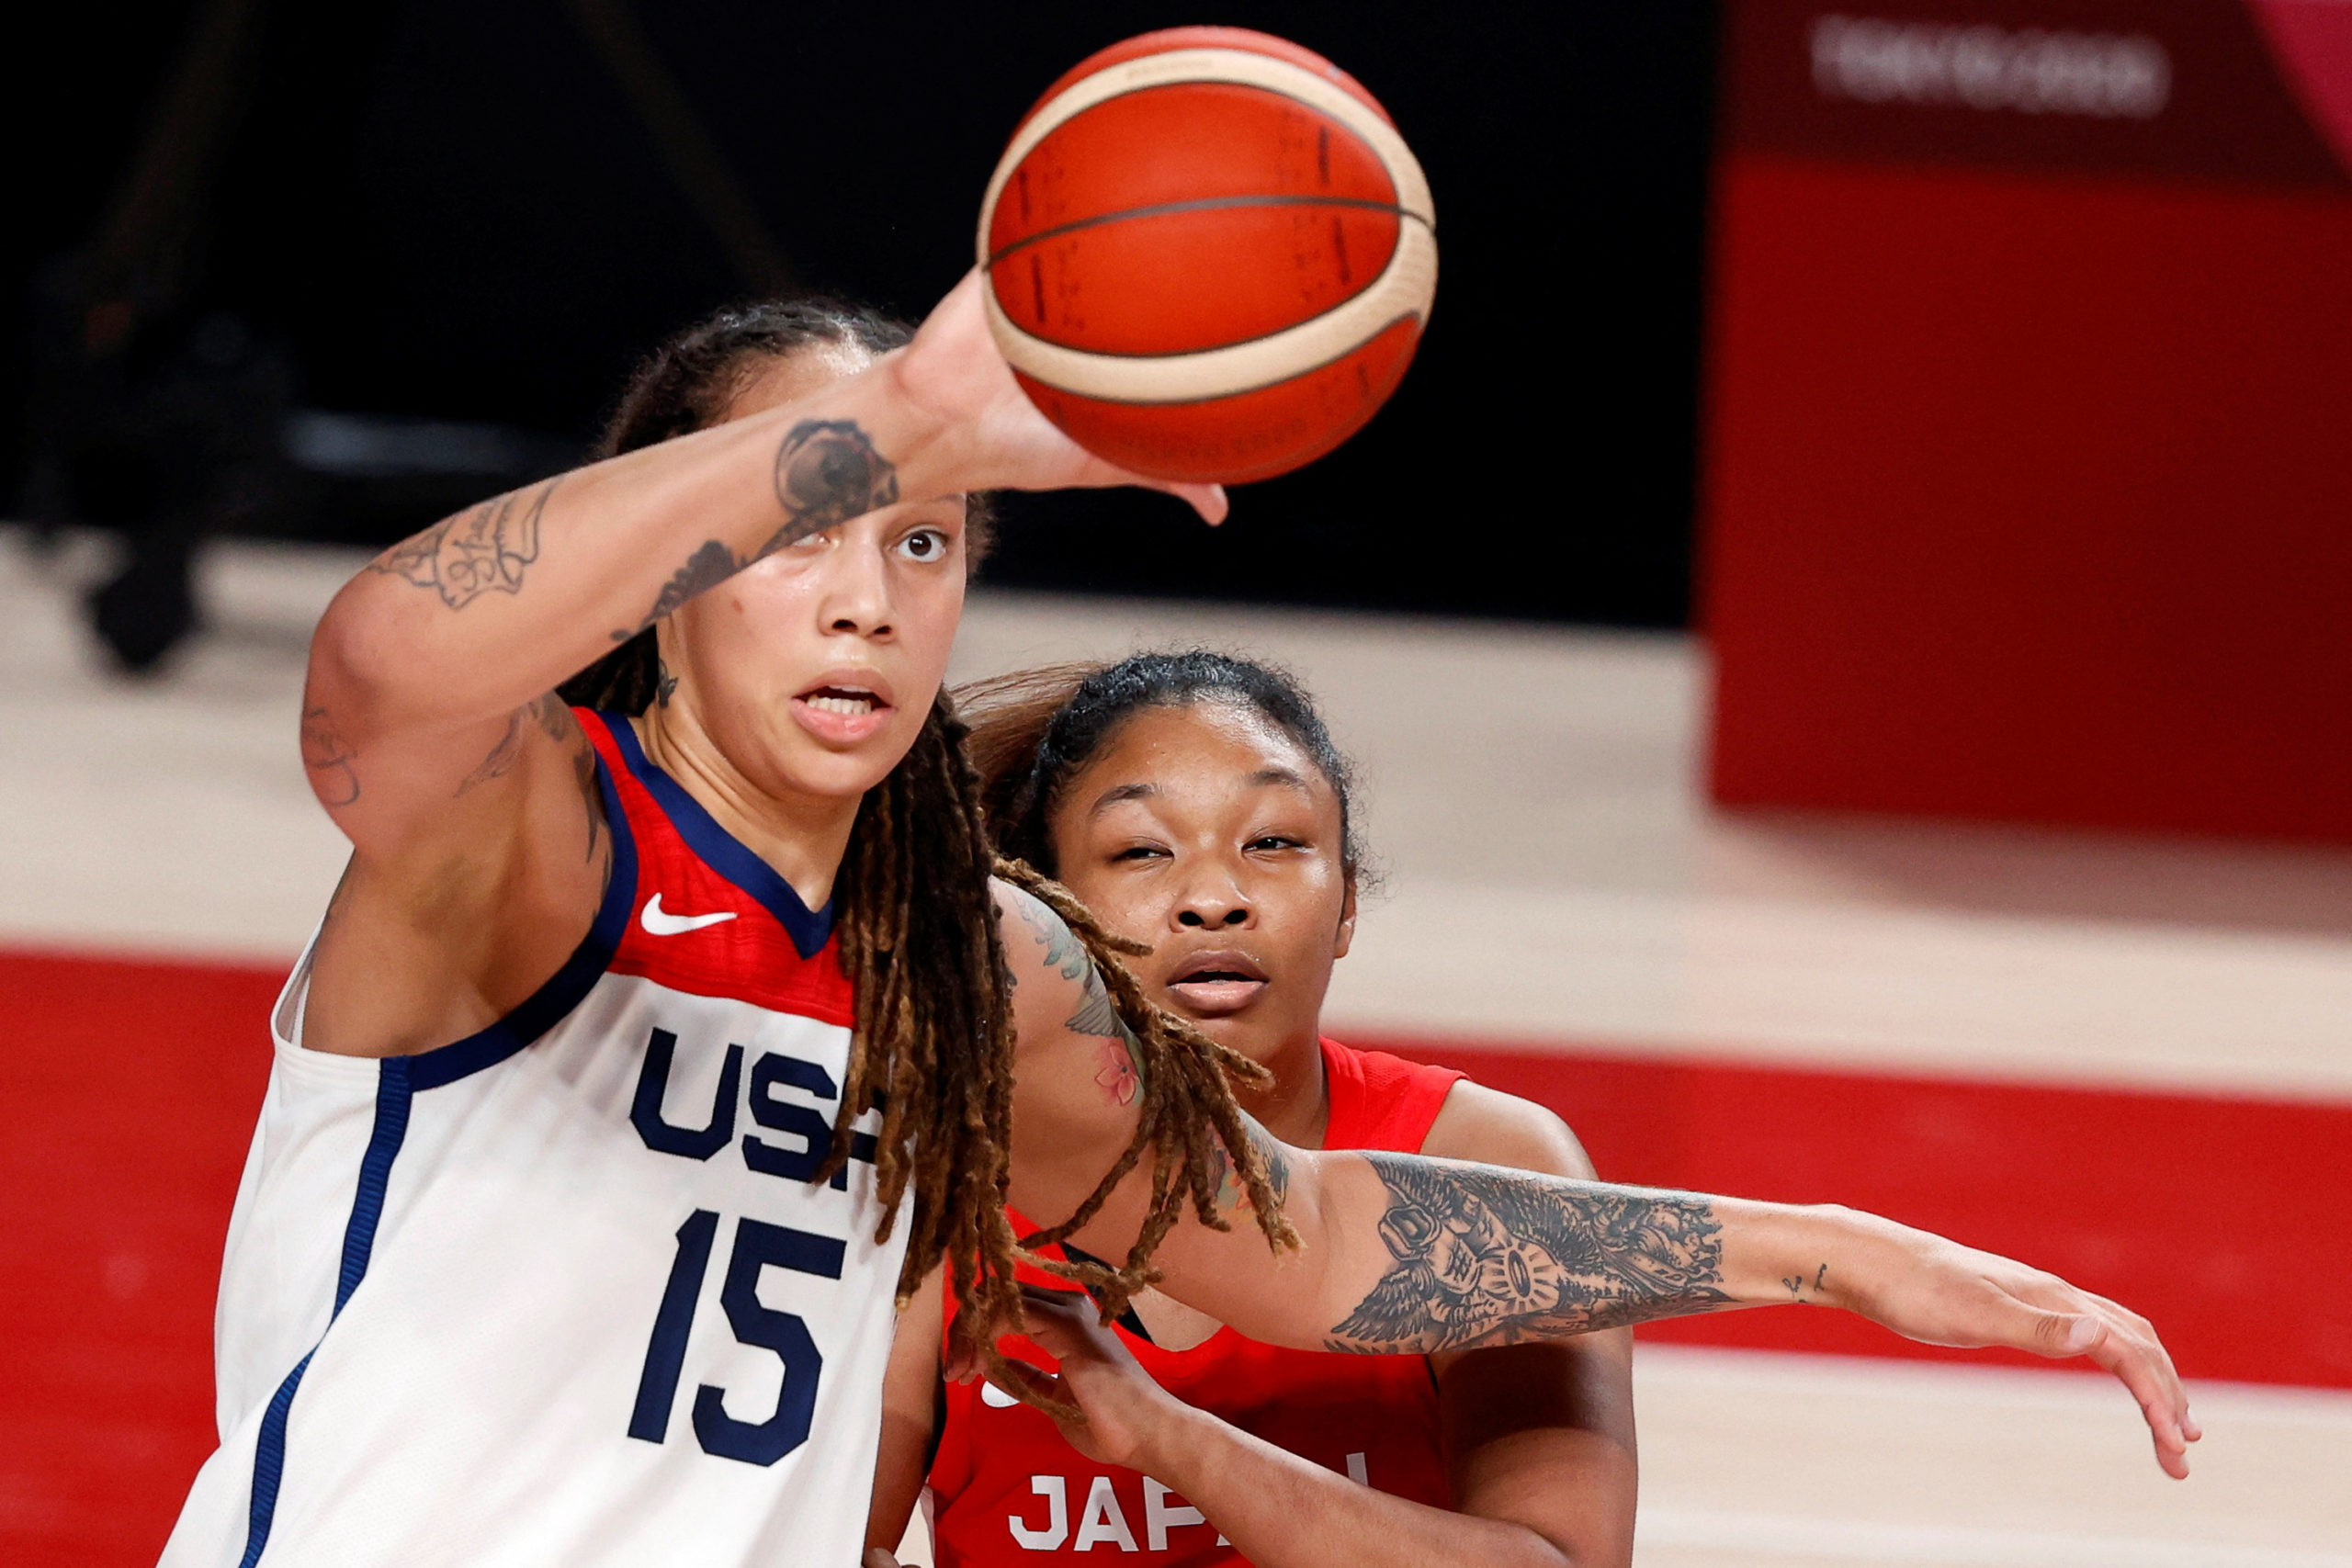 FILE PHOTO: Tokyo 2020 Olympics - Basketball - Women - Gold medal match - United States v Japan - Saitama Super Arena, Saitama, Japan - August 8, 2021. Brittney Griner of the United States in action with Monica Okoye of Japan 